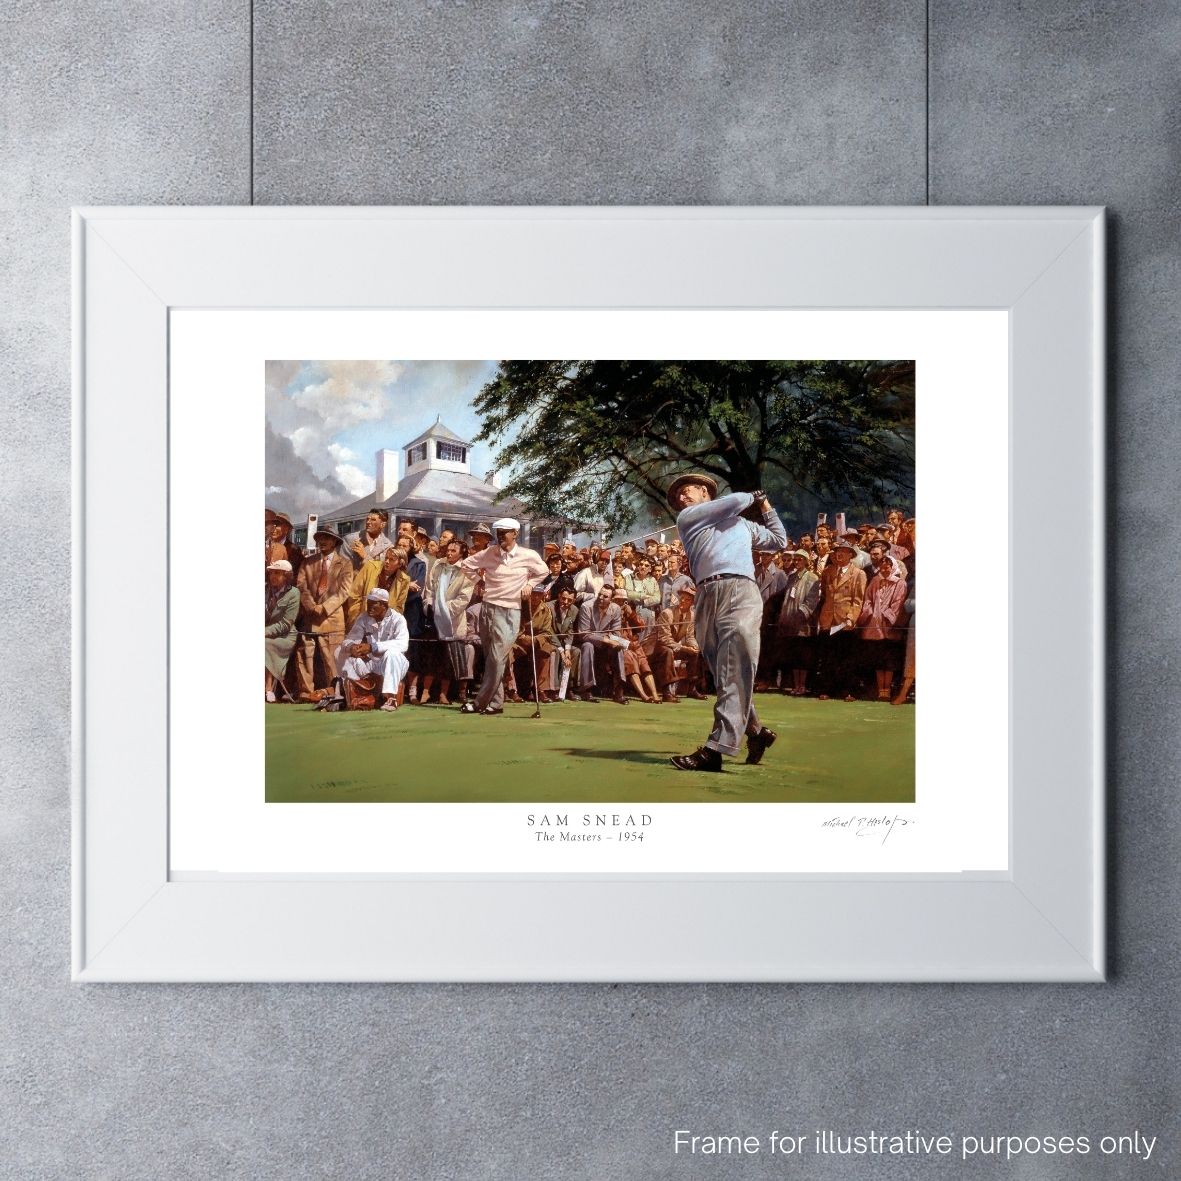 Sam Snead, The Masters 1954 framed fine art print by Michael Heslop